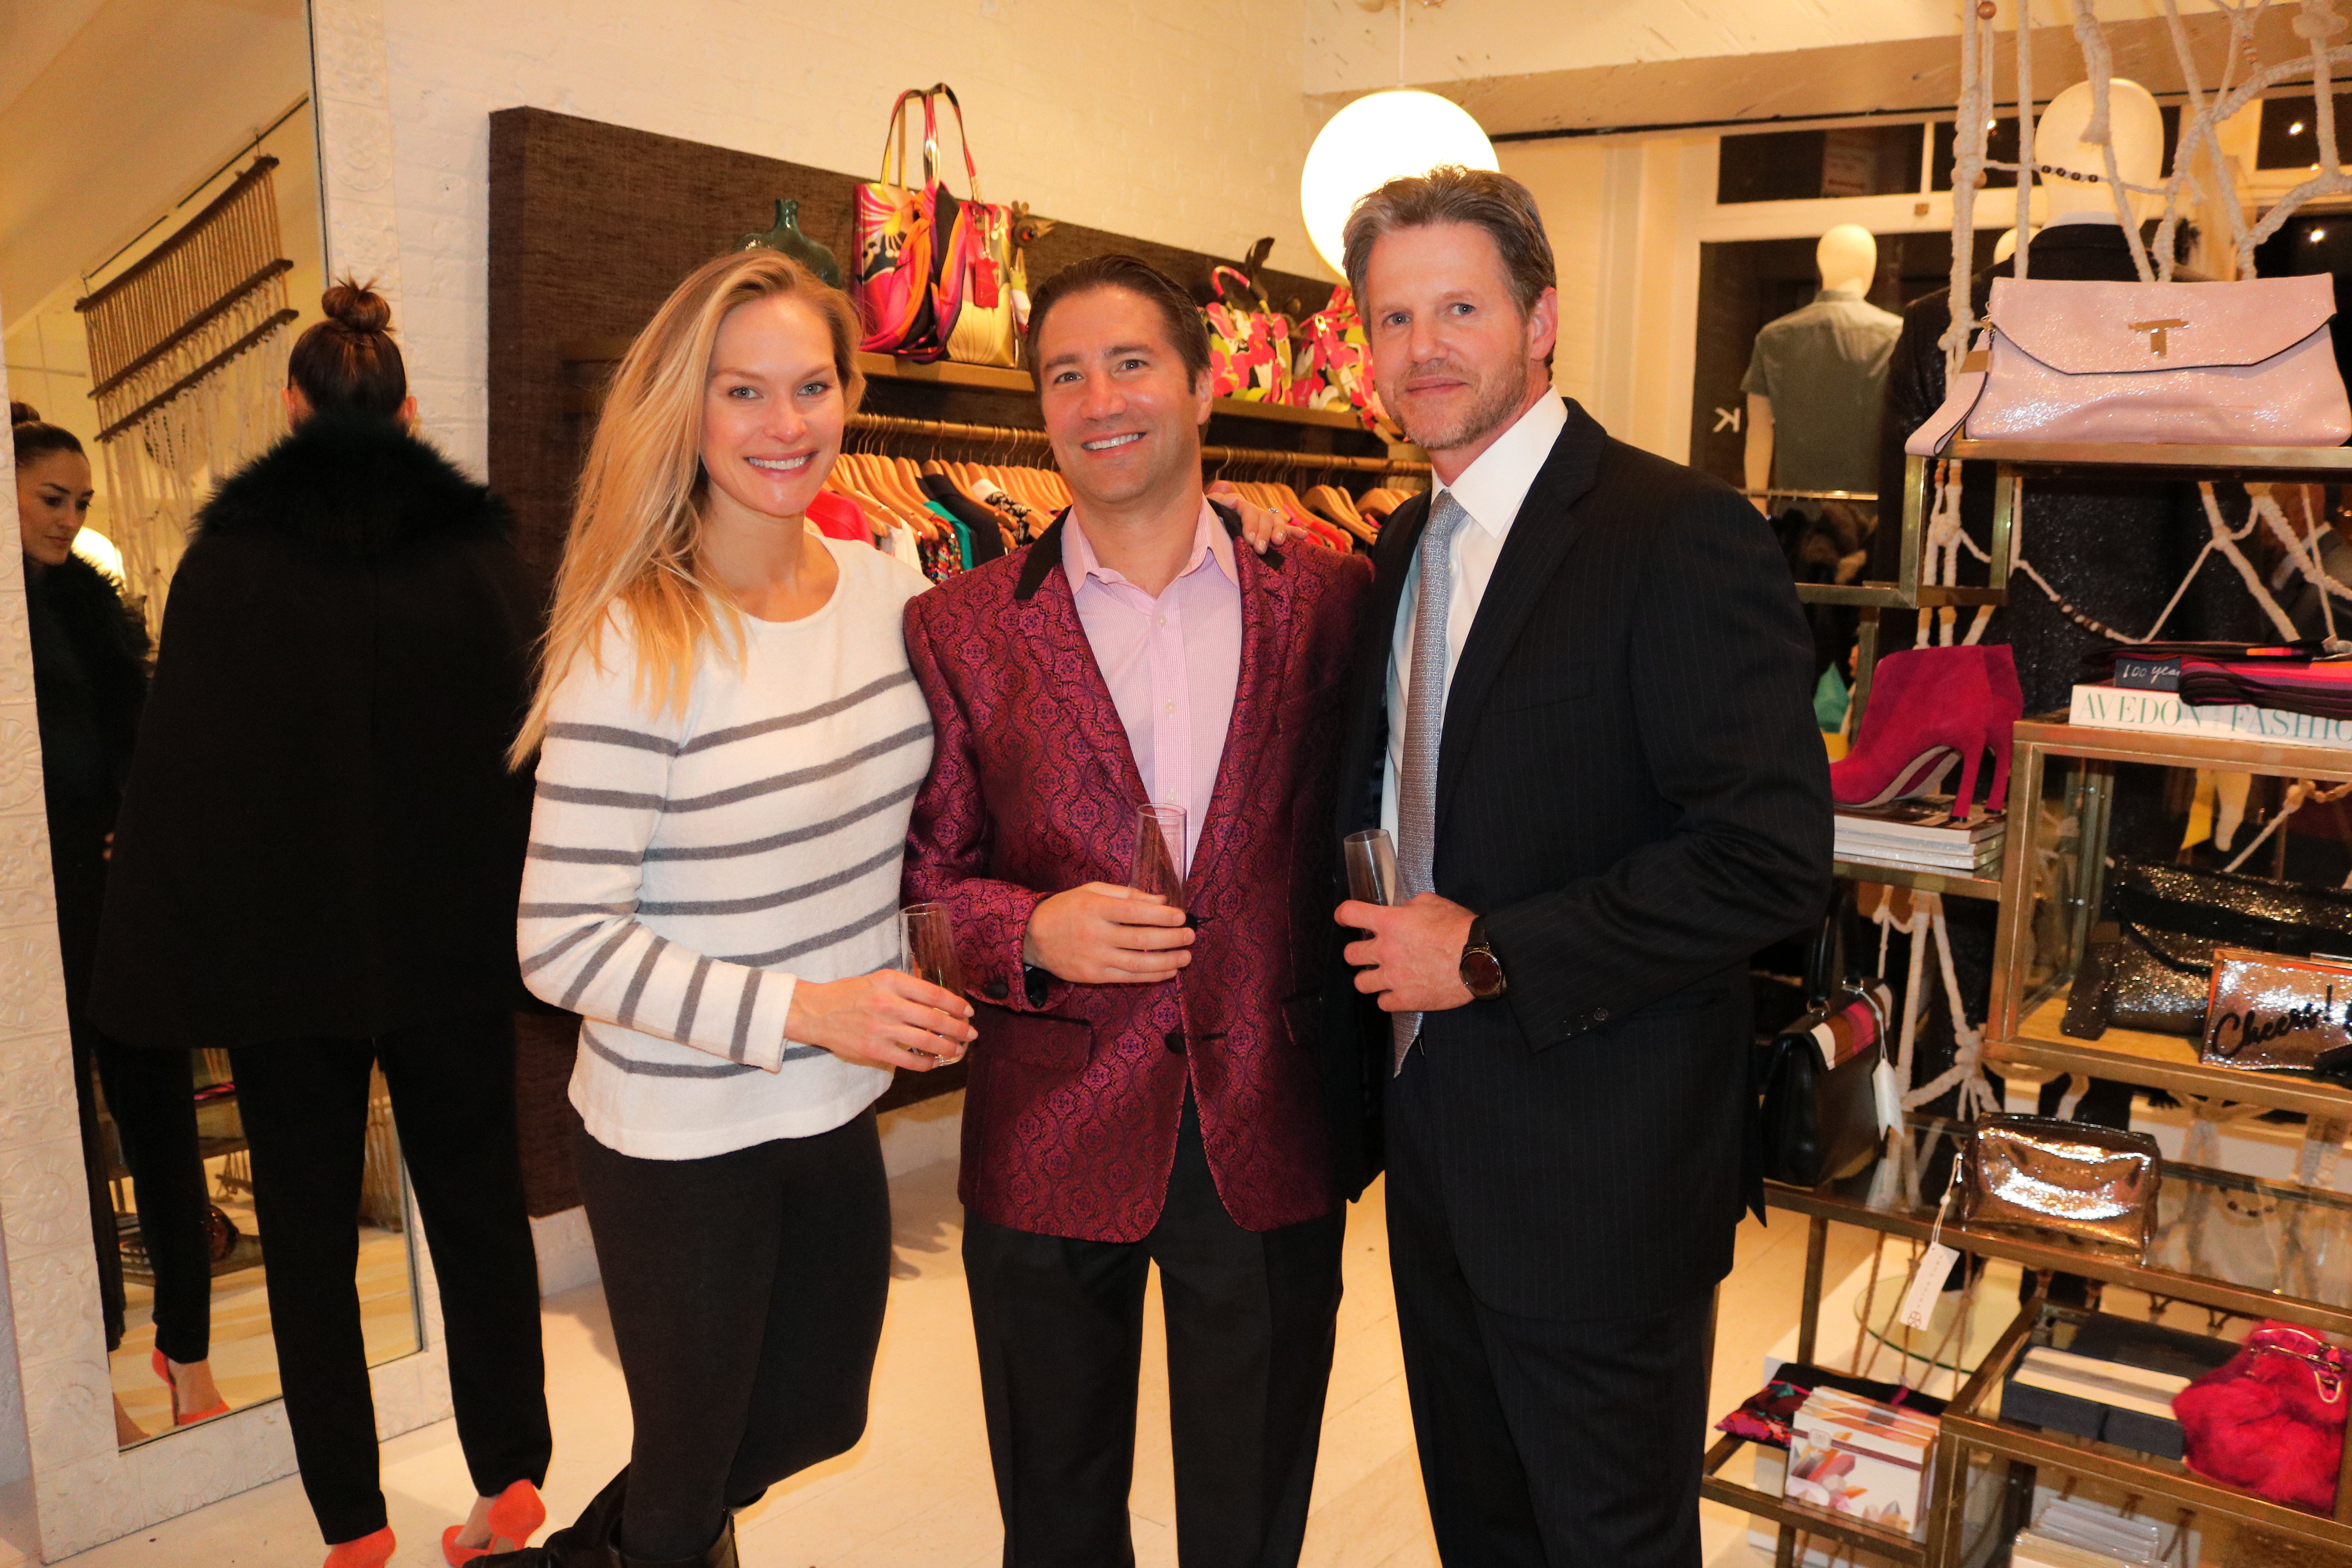 Star Mountain Charitable Foundation & Trina Turk Holiday Shopping Event (12/7/16)